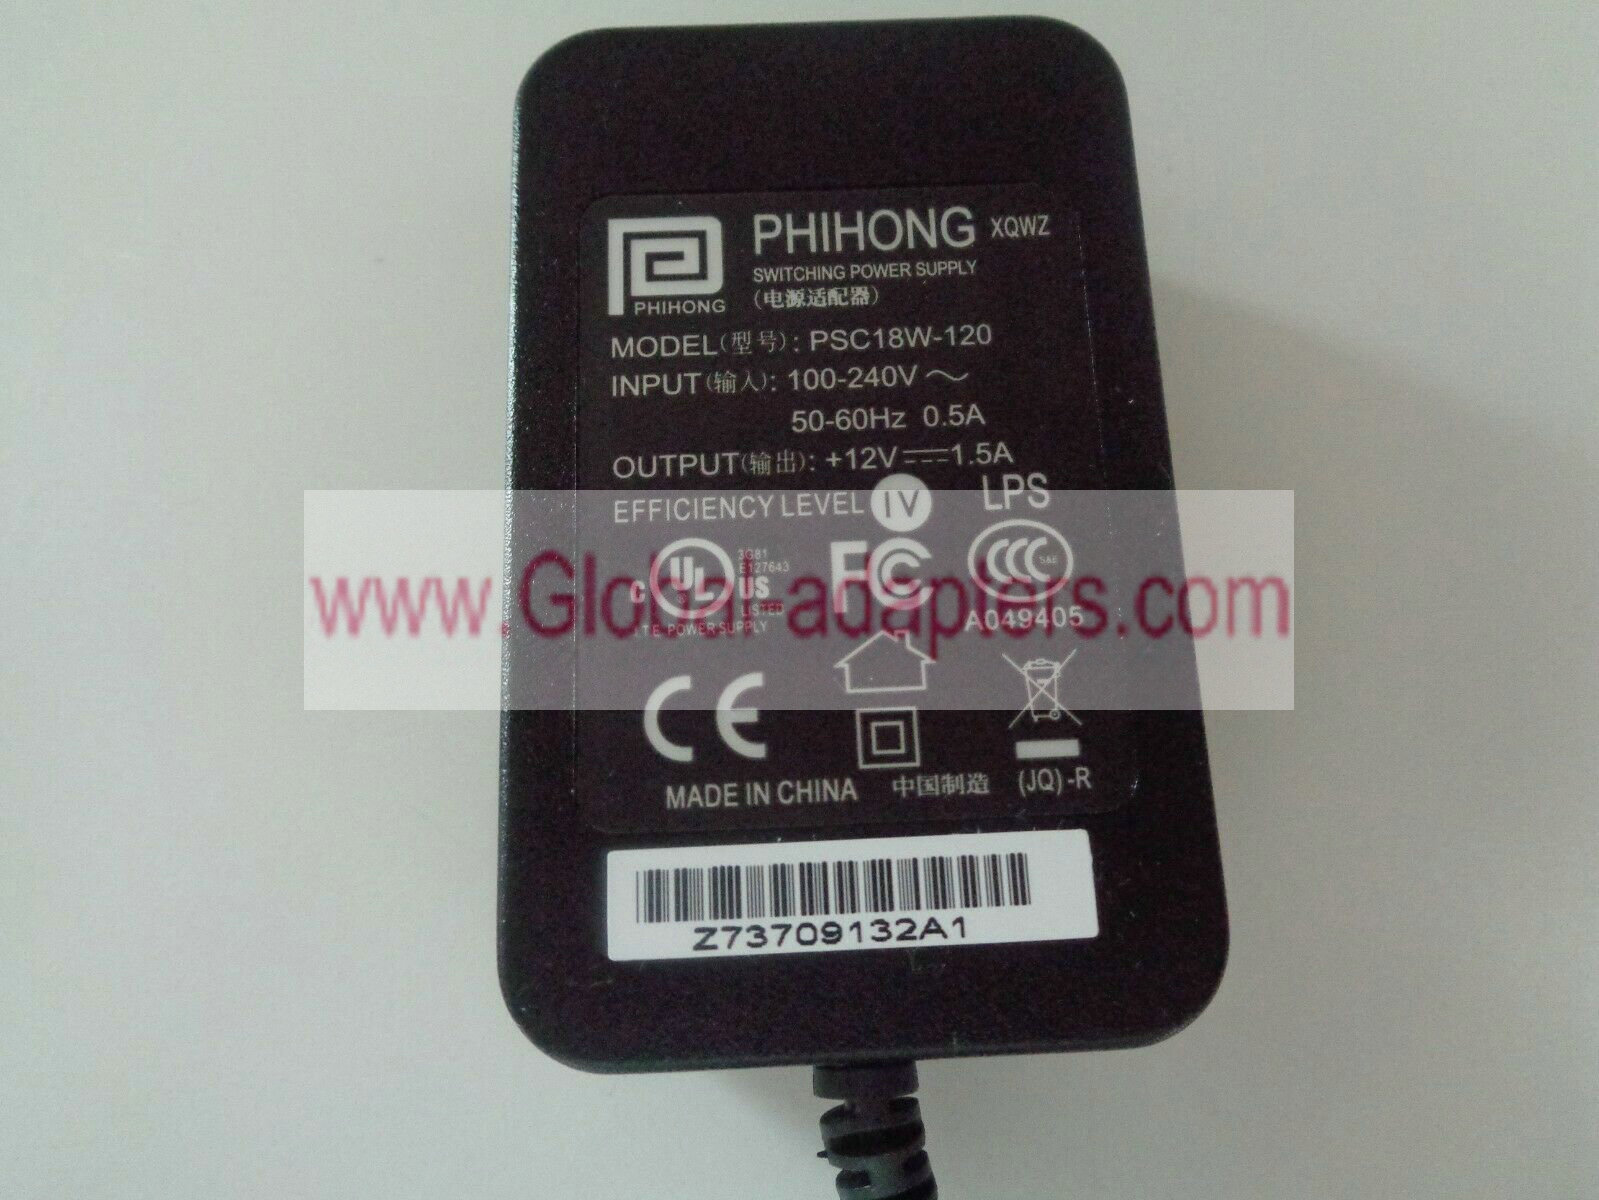 New PHIHONG PSC18W-120 12V 1.5A POWER SUPPLY AC ADAPTER